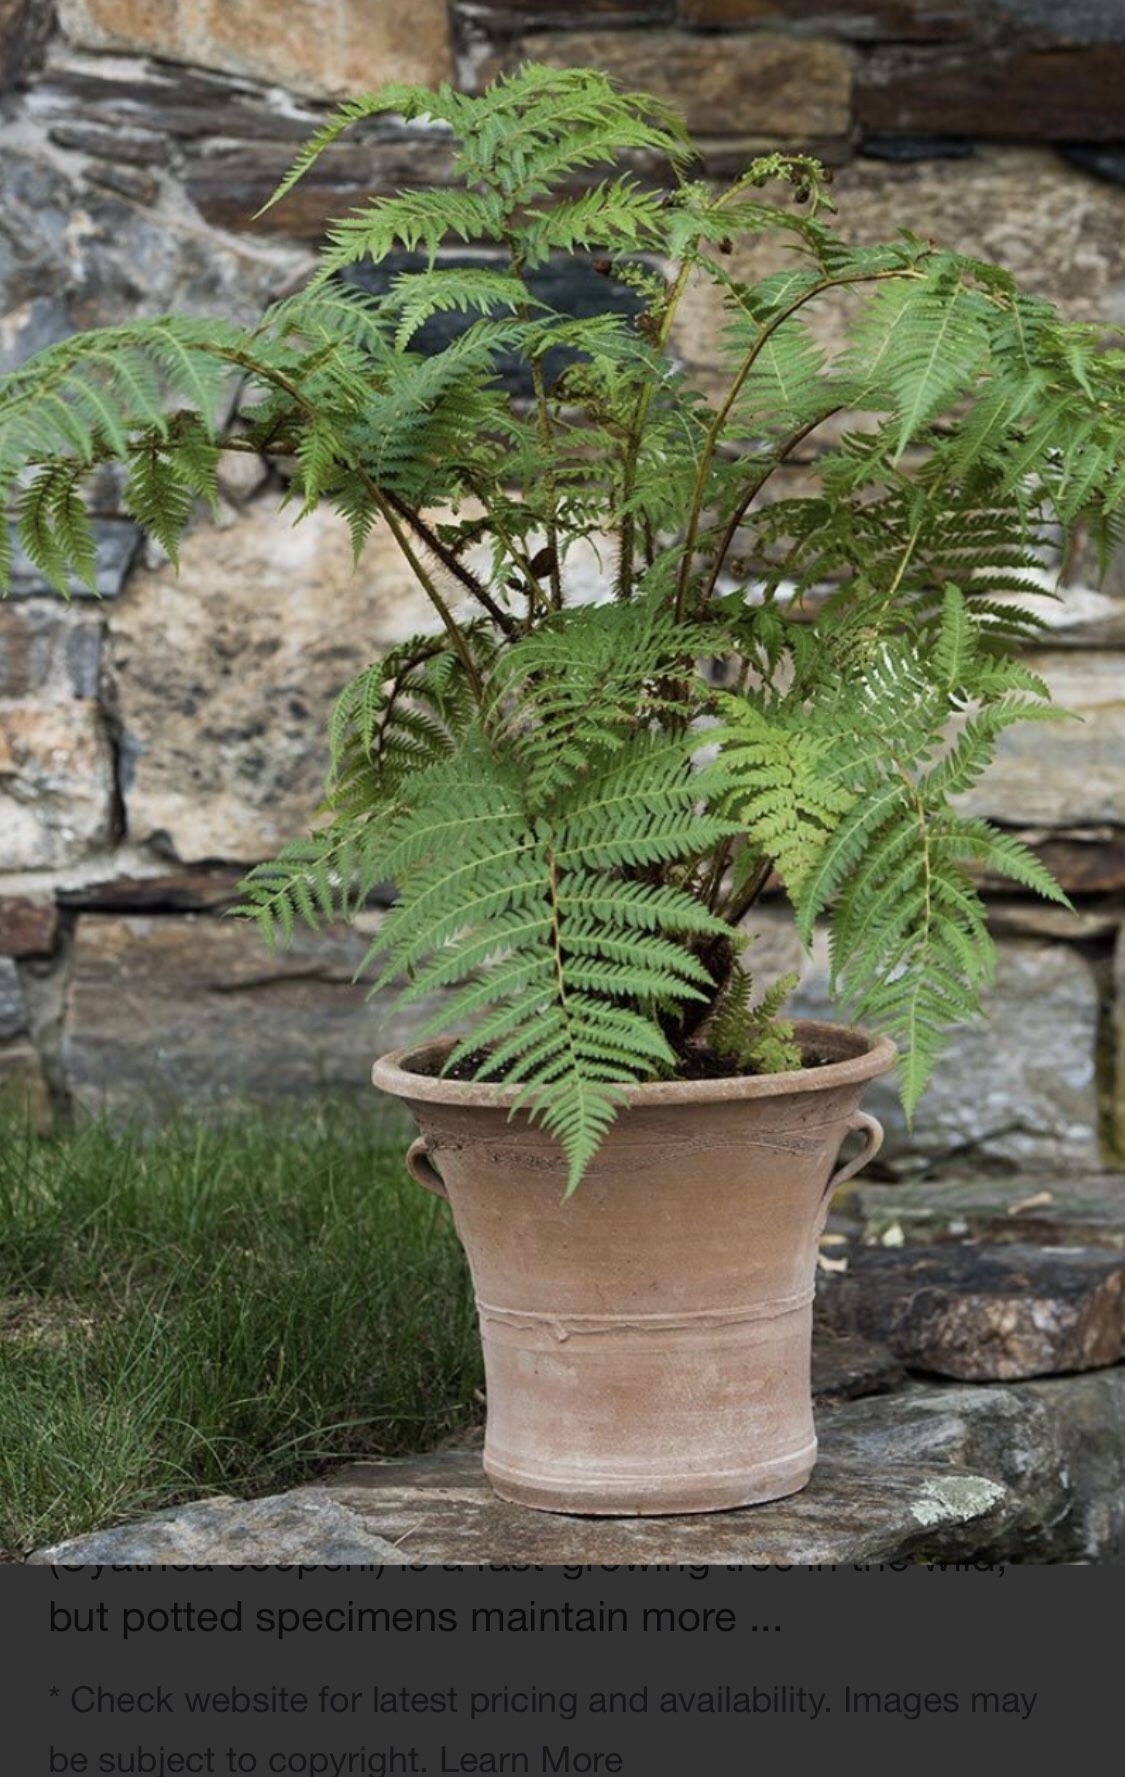 Tasmanian fern in 5’gallon plastic pot. Not ceramic pot . For shipping out